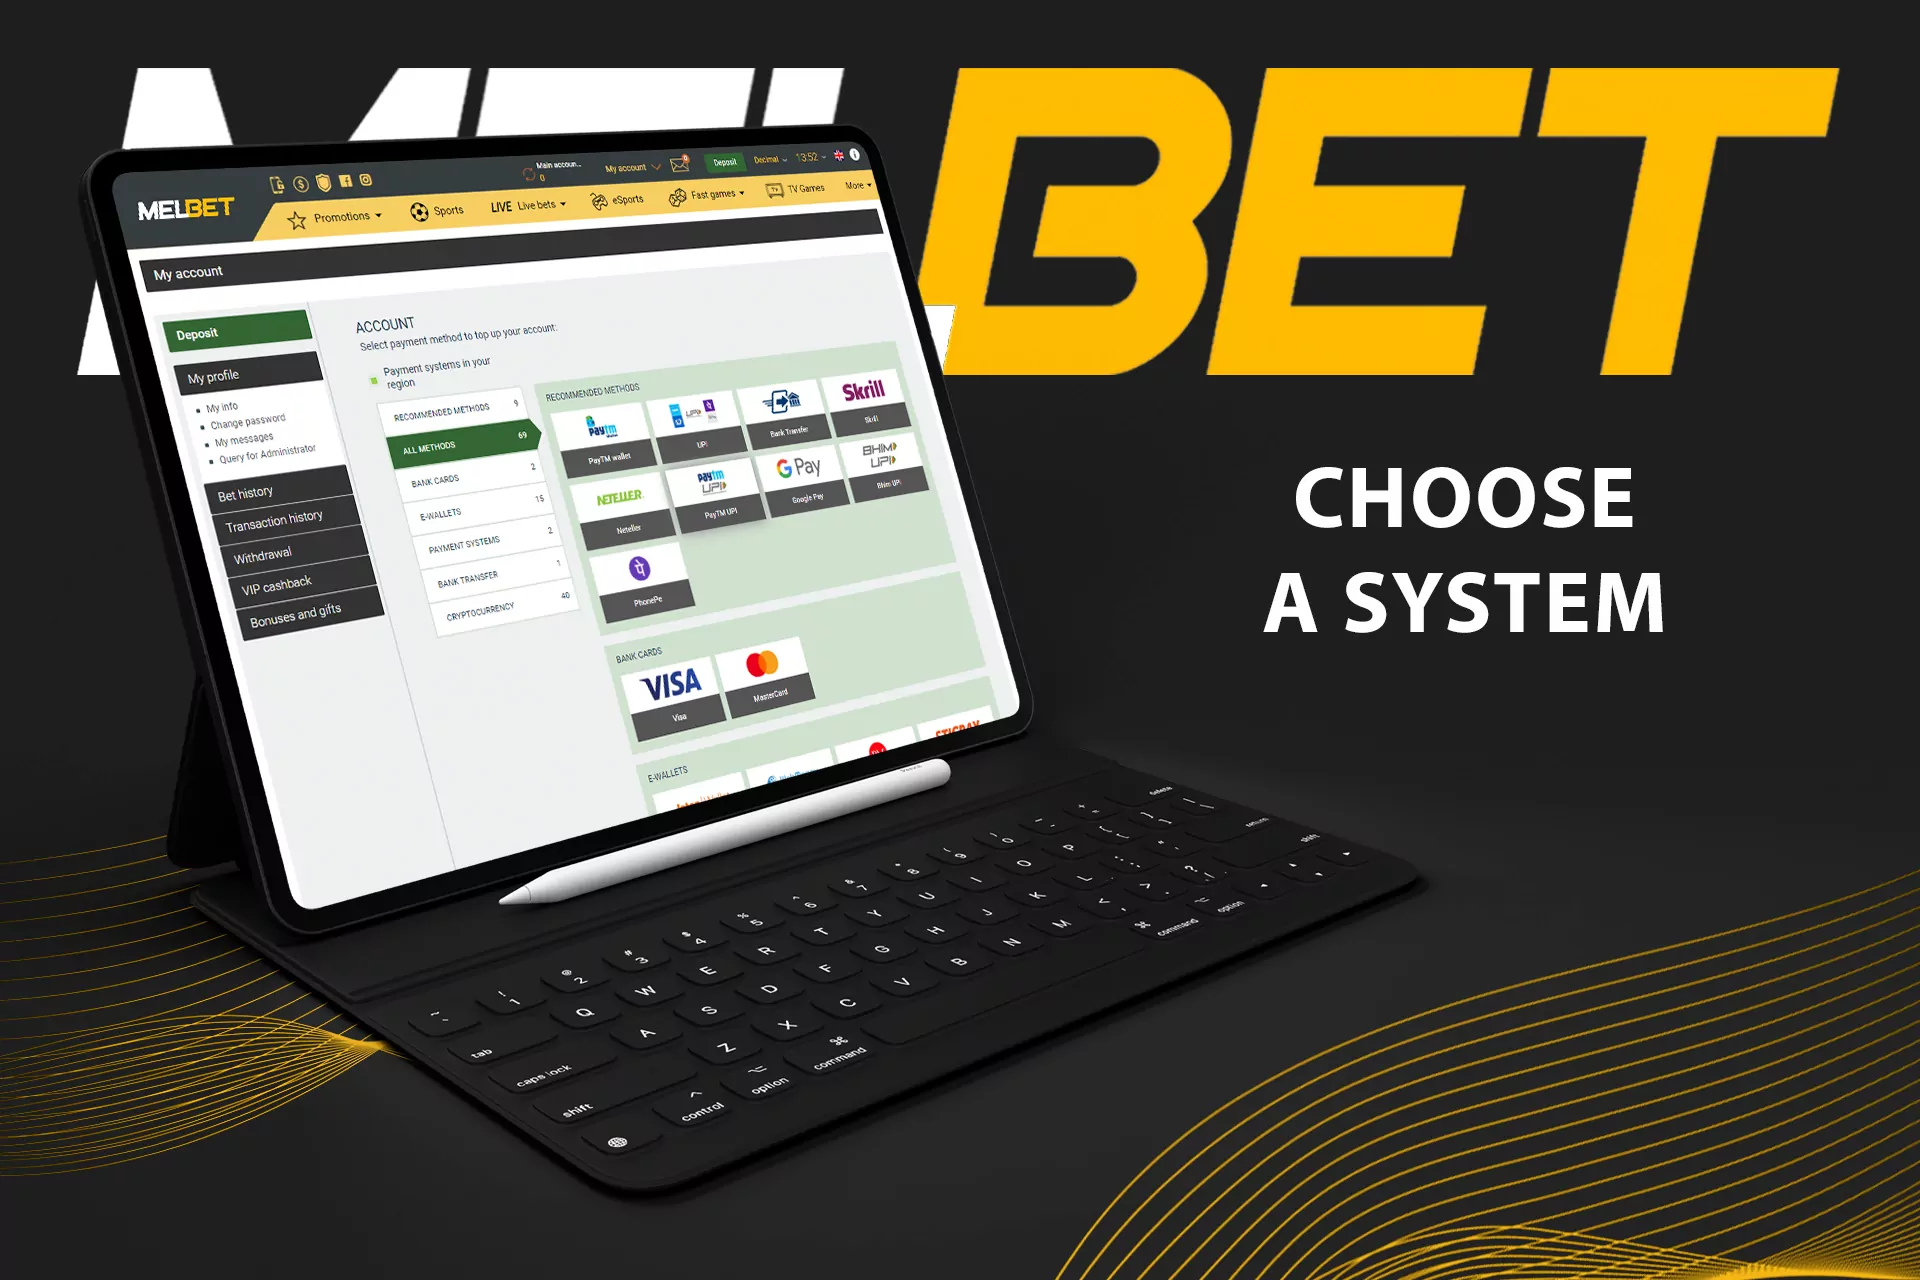 Choose a payment system to make a deposit at Melbet.